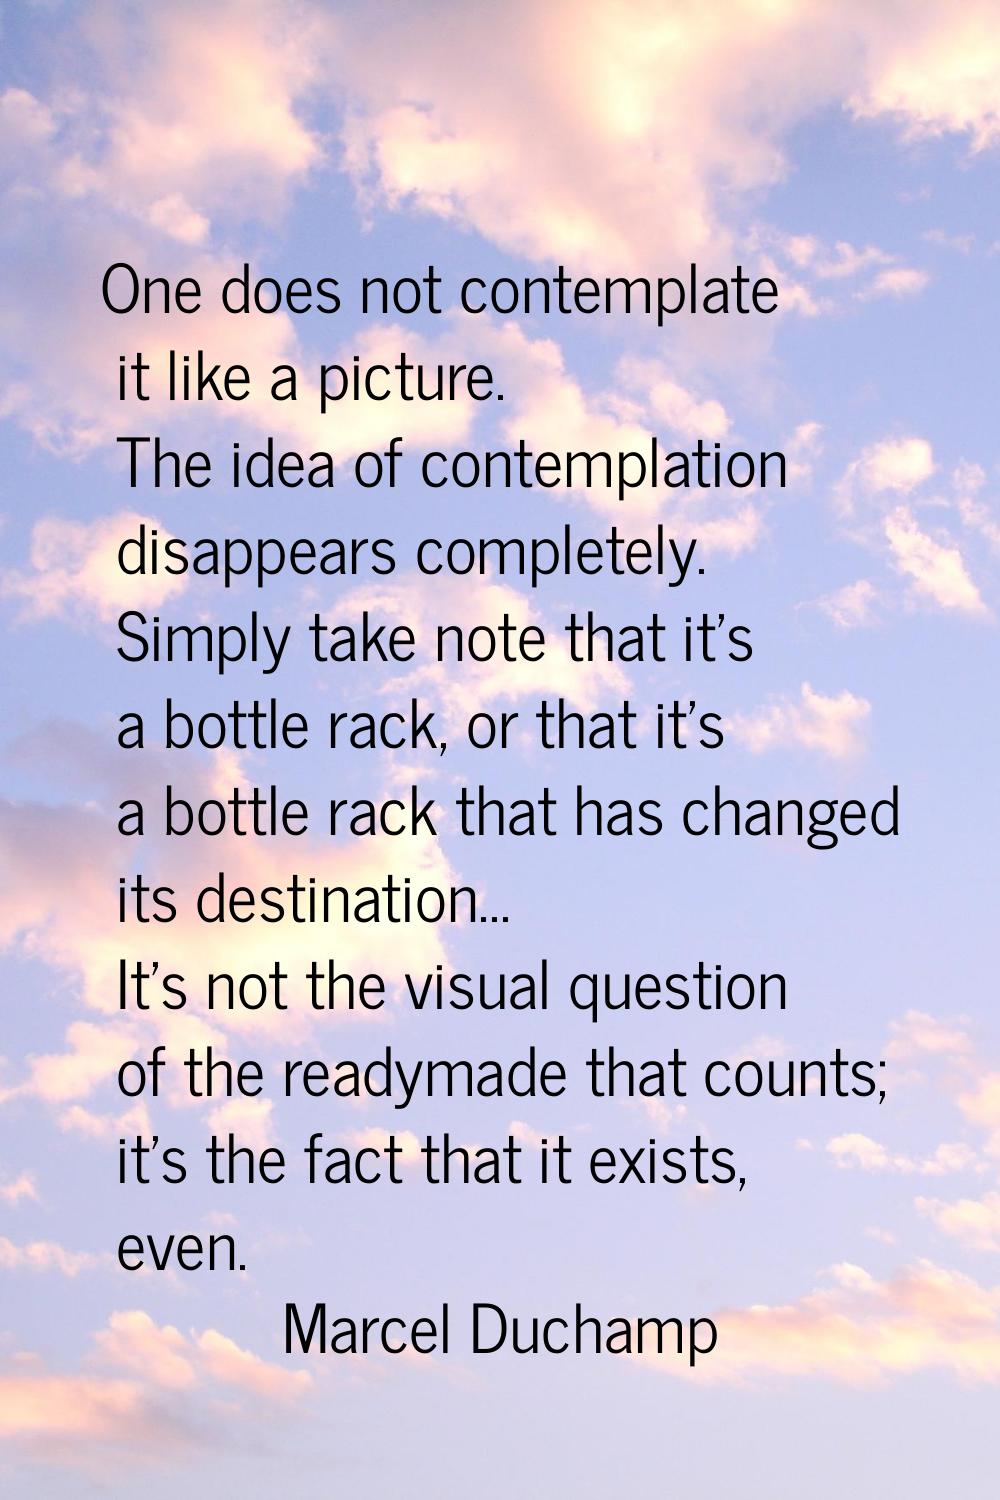 One does not contemplate it like a picture. The idea of contemplation disappears completely. Simply